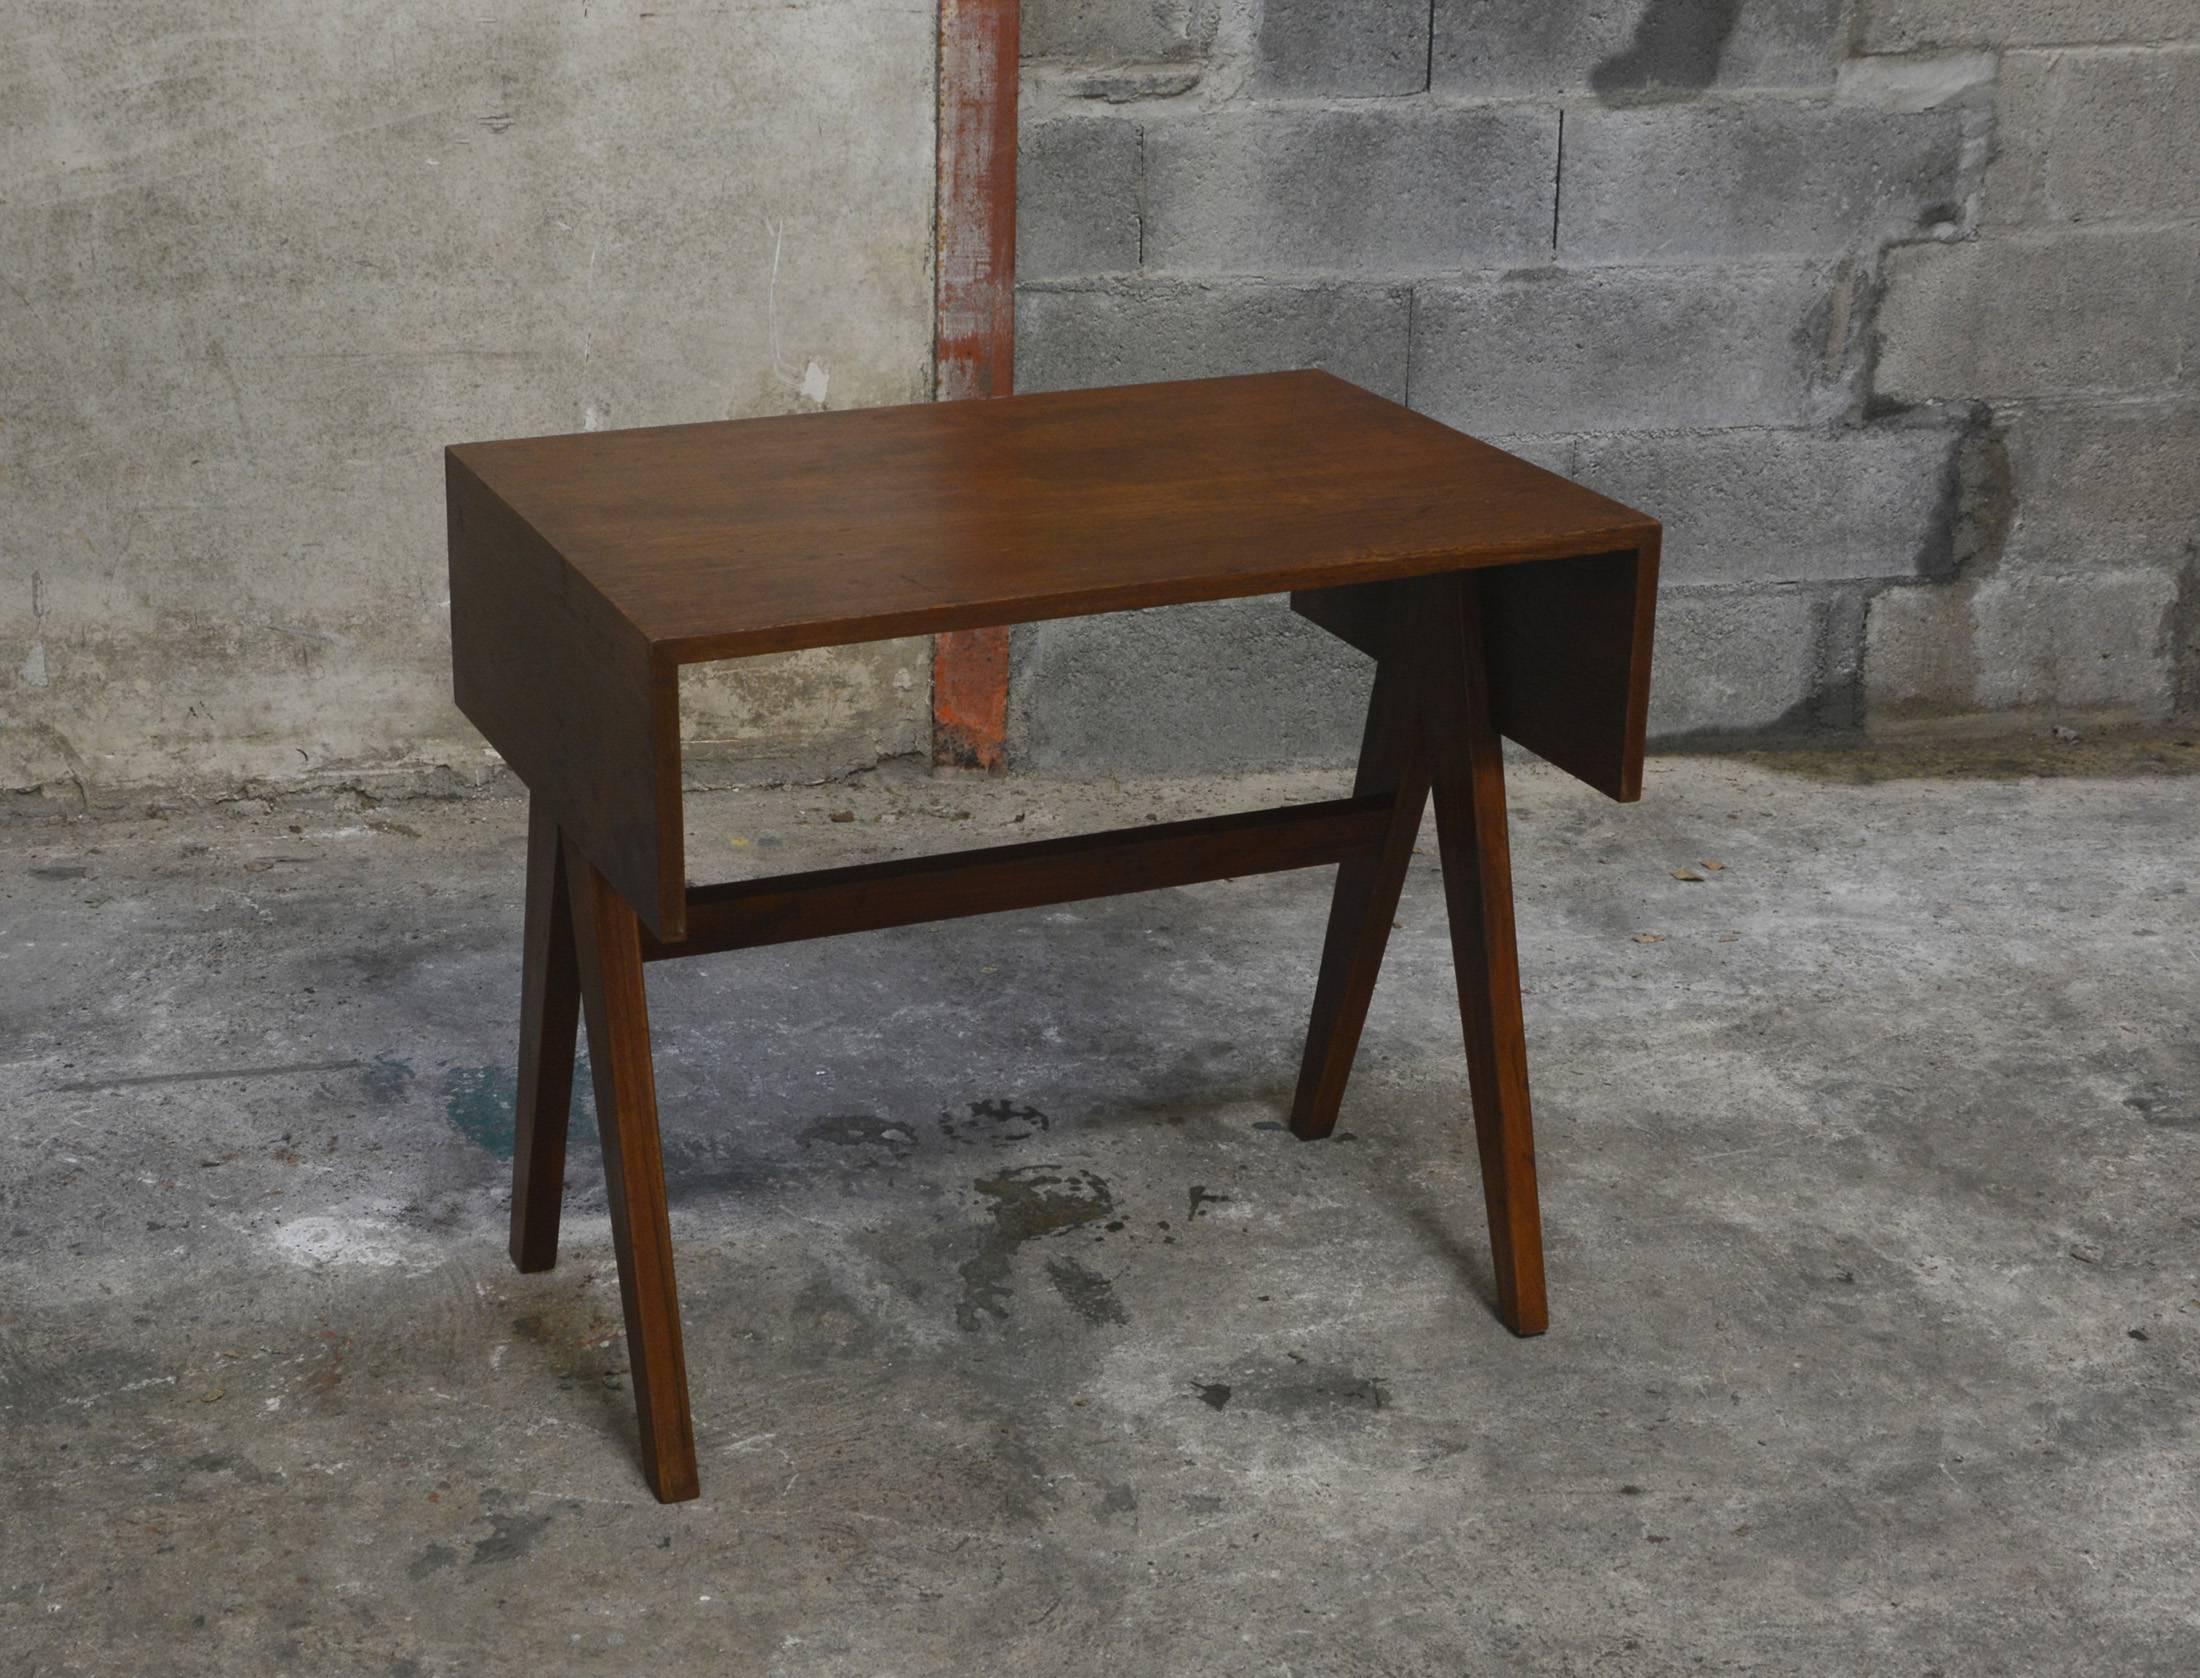 Pierre Jeanneret, student desk for the college of architecture in Chandigarh, India
Solid teak, V-shaped legs.
See photo before restoration when we bought it in Chandigarh (we are one of the few to propose these photos).
Possibility to sell it